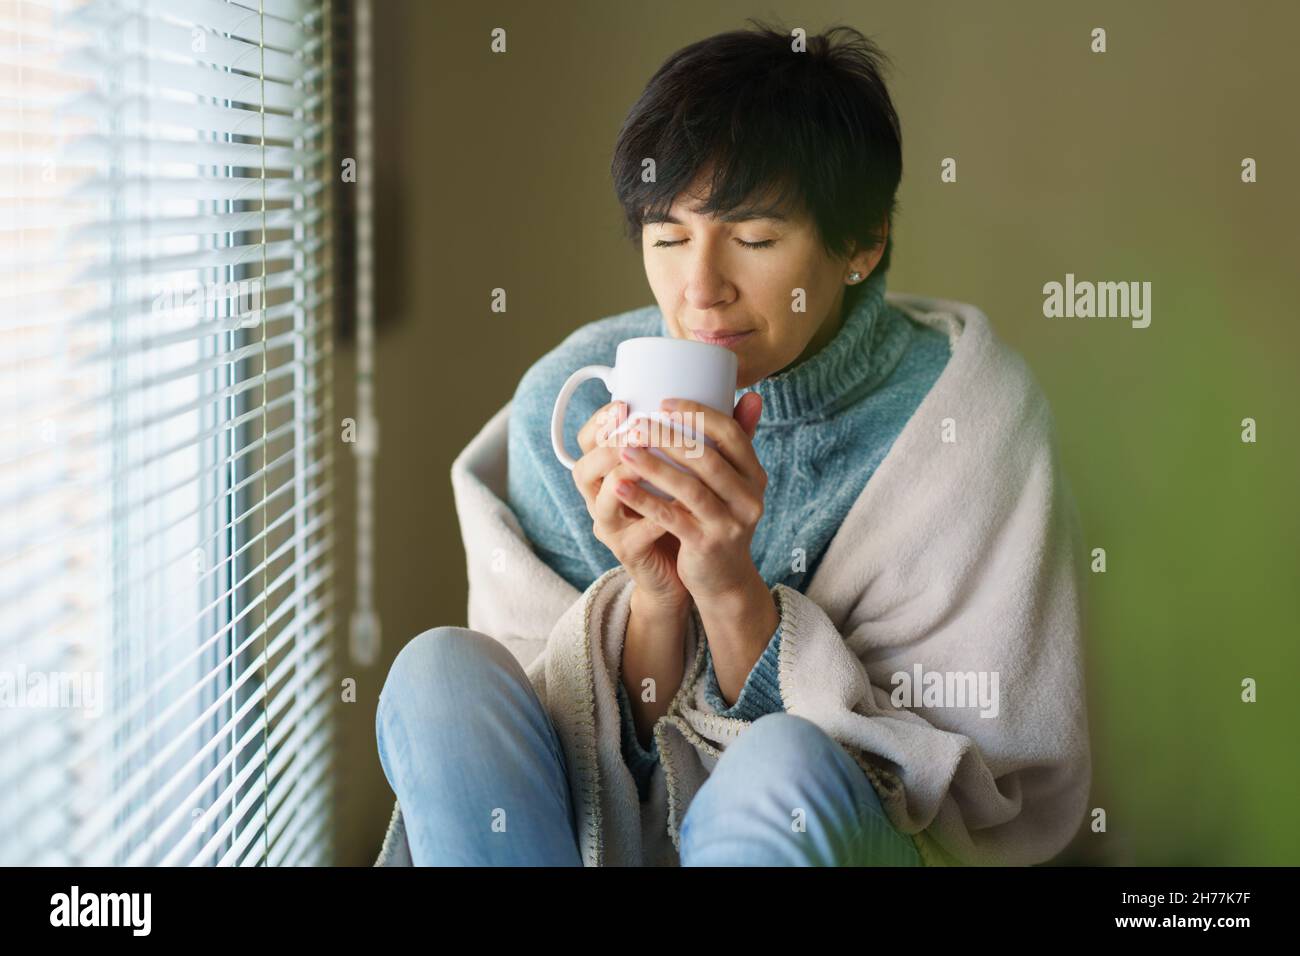 Middle-aged woman smelling coffee from her cup near a window. Stock Photo